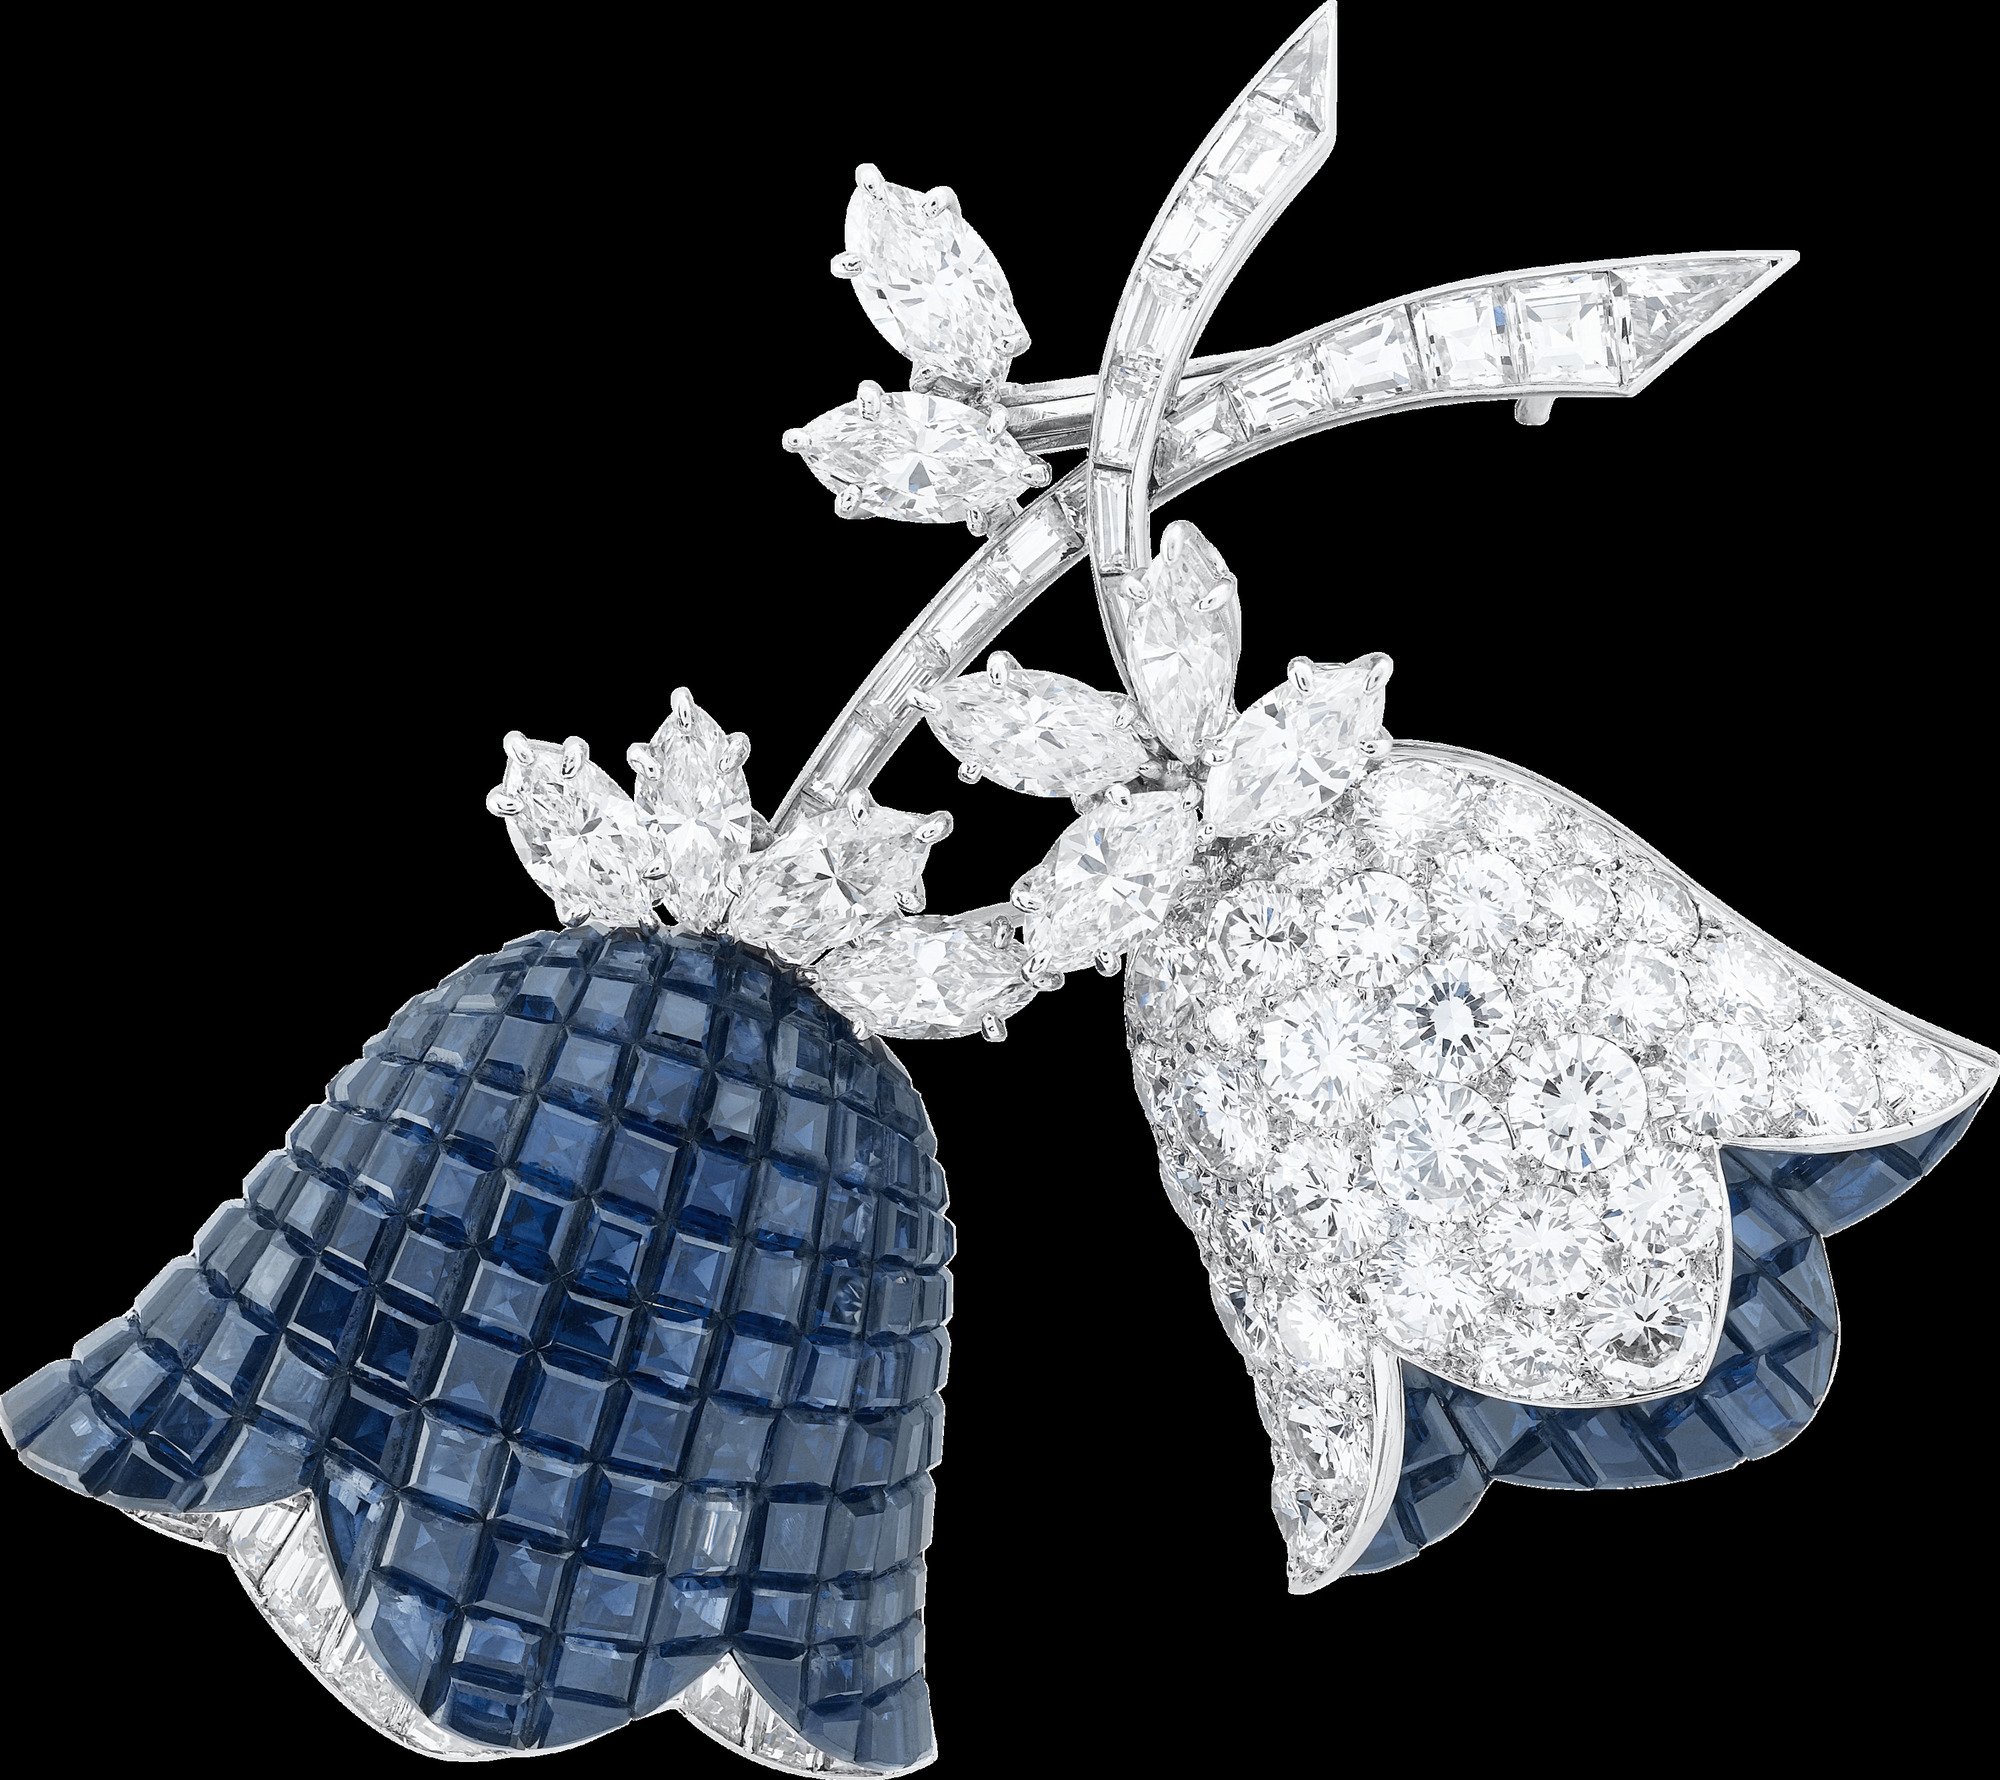 A Van Cleef & Arpels exhibition is coming to London's Design